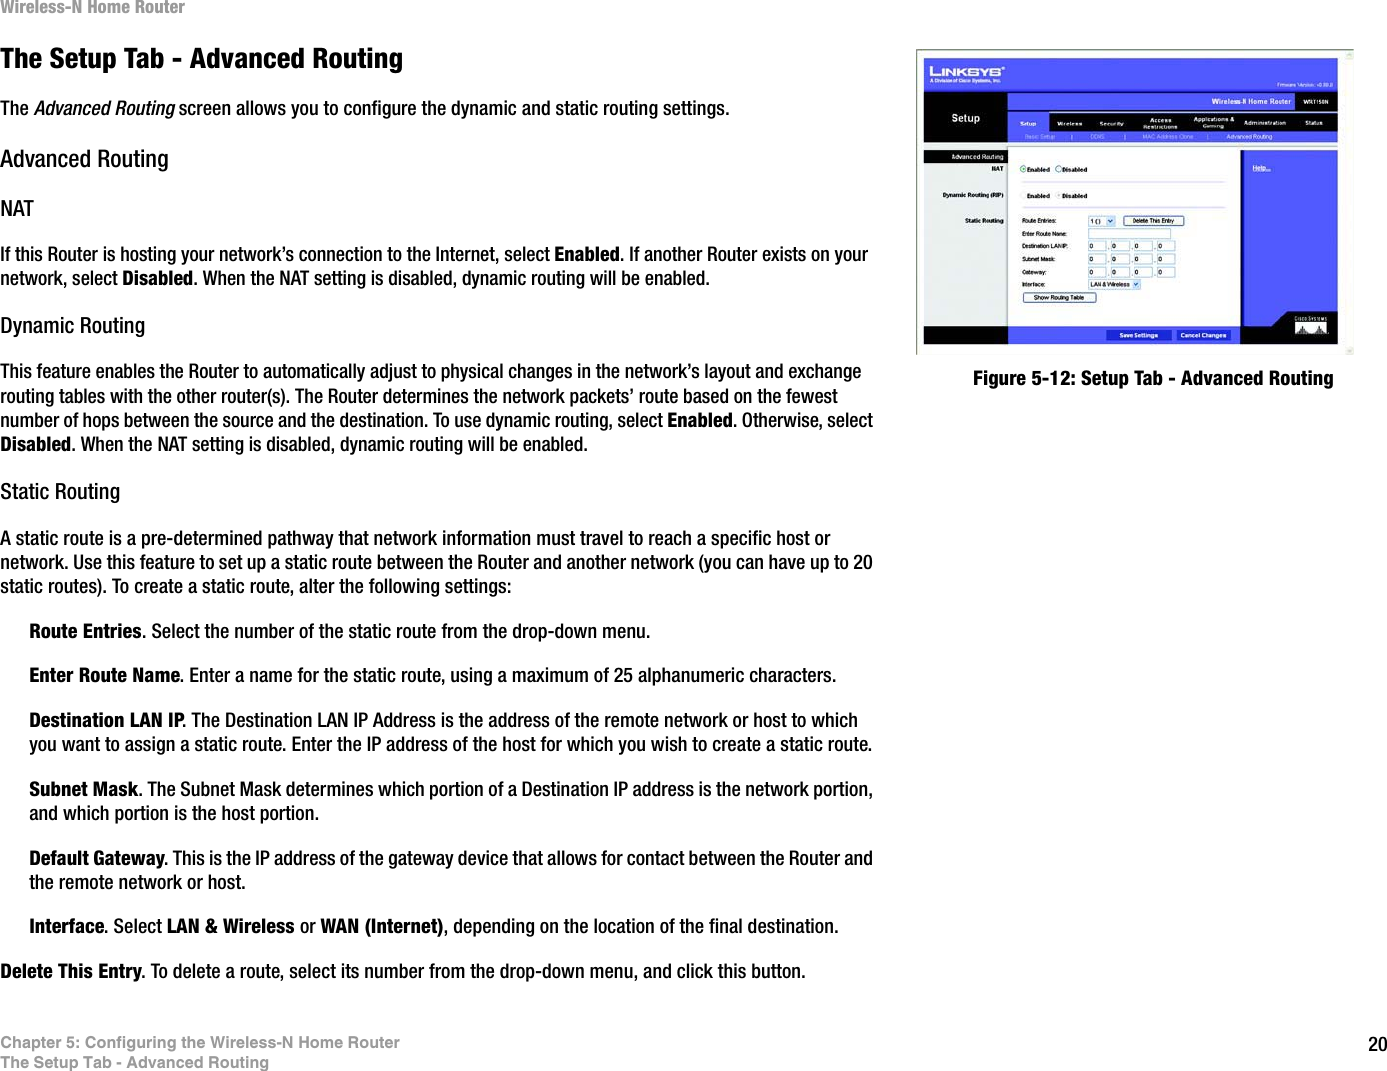 20Chapter 5: Configuring the Wireless-N Home RouterThe Setup Tab - Advanced RoutingWireless-N Home RouterThe Setup Tab - Advanced RoutingThe Advanced Routing screen allows you to configure the dynamic and static routing settings.Advanced RoutingNATIf this Router is hosting your network’s connection to the Internet, select Enabled. If another Router exists on your network, select Disabled. When the NAT setting is disabled, dynamic routing will be enabled.Dynamic RoutingThis feature enables the Router to automatically adjust to physical changes in the network’s layout and exchange routing tables with the other router(s). The Router determines the network packets’ route based on the fewest number of hops between the source and the destination. To use dynamic routing, select Enabled. Otherwise, select Disabled. When the NAT setting is disabled, dynamic routing will be enabled.Static RoutingA static route is a pre-determined pathway that network information must travel to reach a specific host or network. Use this feature to set up a static route between the Router and another network (you can have up to 20 static routes). To create a static route, alter the following settings: Route Entries. Select the number of the static route from the drop-down menu.Enter Route Name. Enter a name for the static route, using a maximum of 25 alphanumeric characters.Destination LAN IP. The Destination LAN IP Address is the address of the remote network or host to which you want to assign a static route. Enter the IP address of the host for which you wish to create a static route.Subnet Mask. The Subnet Mask determines which portion of a Destination IP address is the network portion, and which portion is the host portion.Default Gateway. This is the IP address of the gateway device that allows for contact between the Router and the remote network or host.Interface. Select LAN &amp; Wireless or WAN (Internet), depending on the location of the final destination.Delete This Entry. To delete a route, select its number from the drop-down menu, and click this button.Figure 5-12: Setup Tab - Advanced Routing